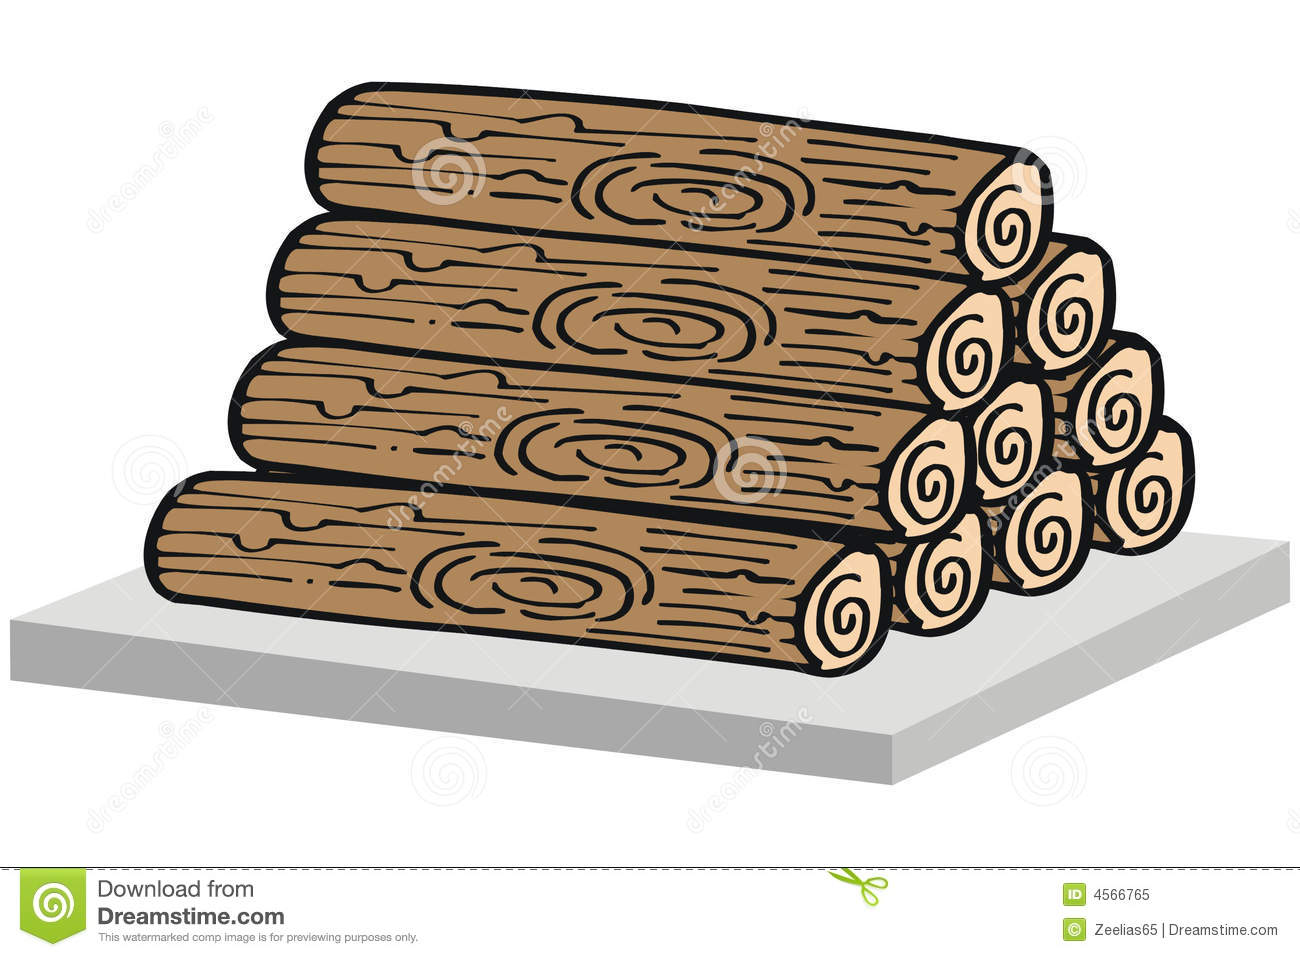 Displaying 20  Images For   Pile Of Logs Clipart